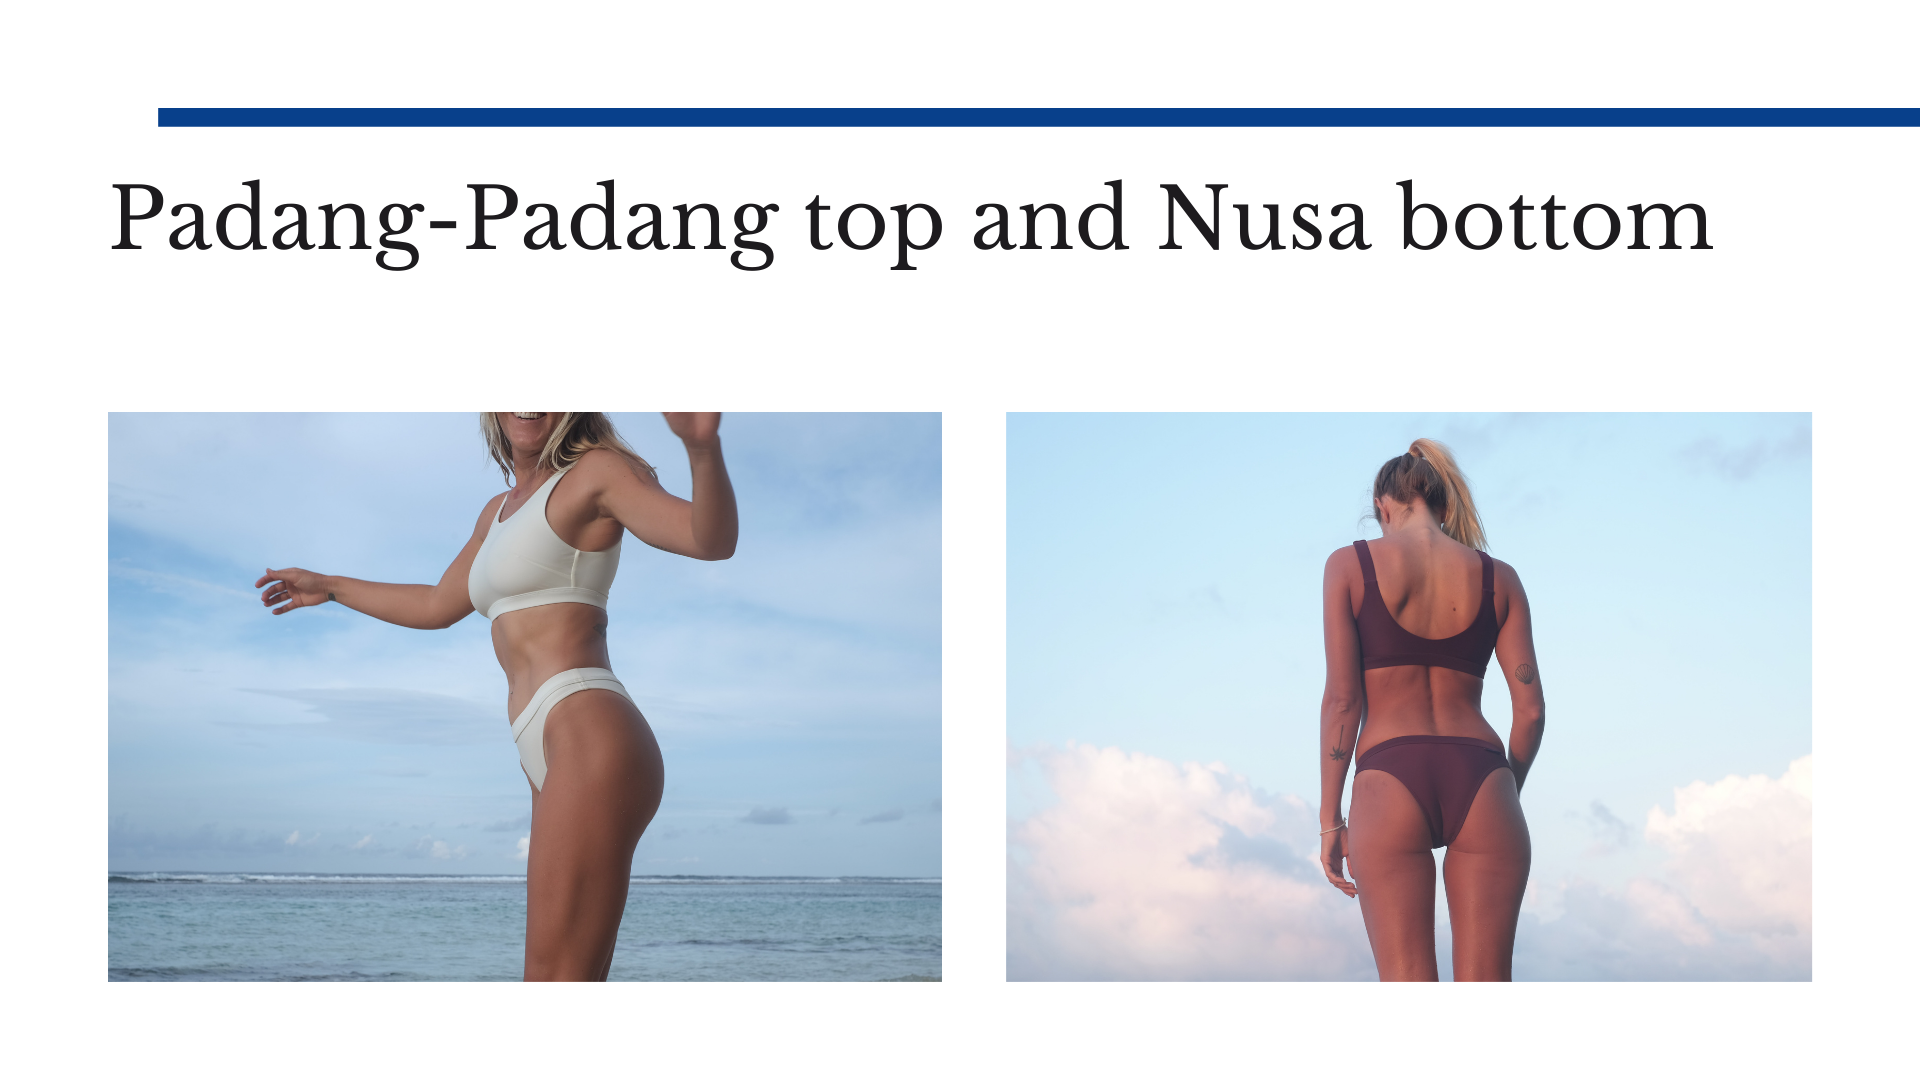 Surf swimwear guide - A roadmap to your style 